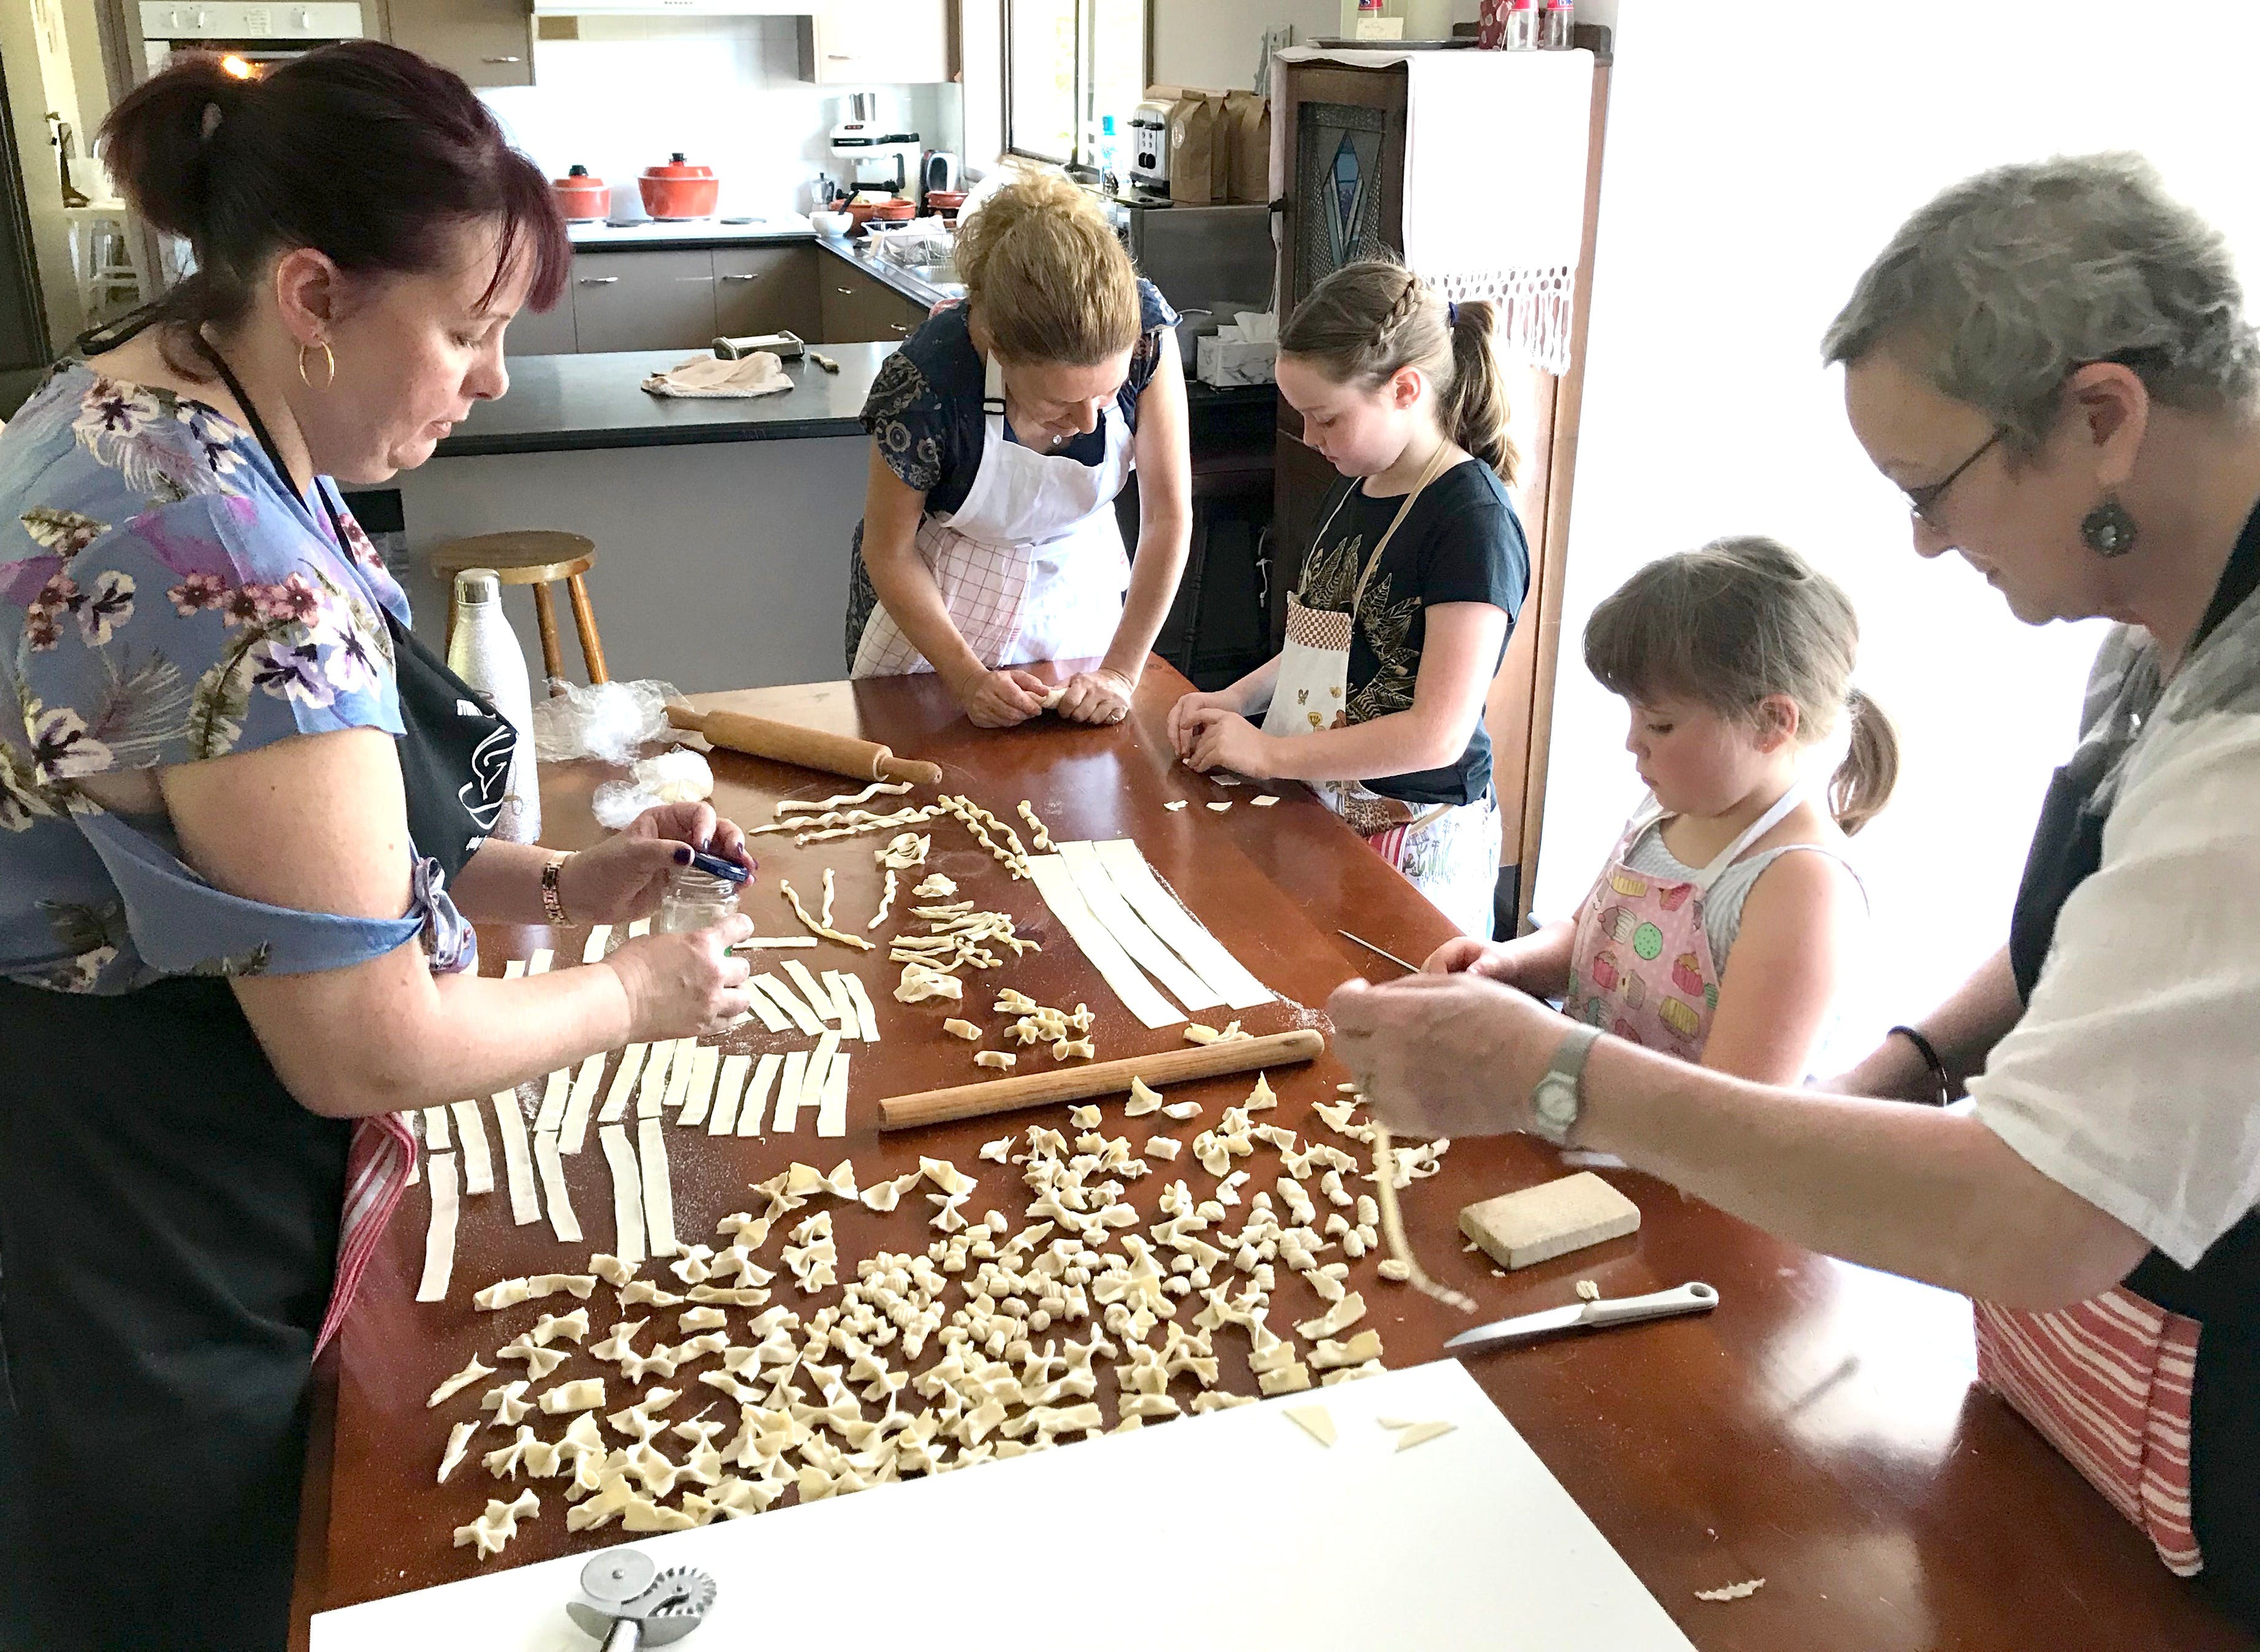 Kids Pasta Making Class - hands on fun at your house - Pubs Sydney